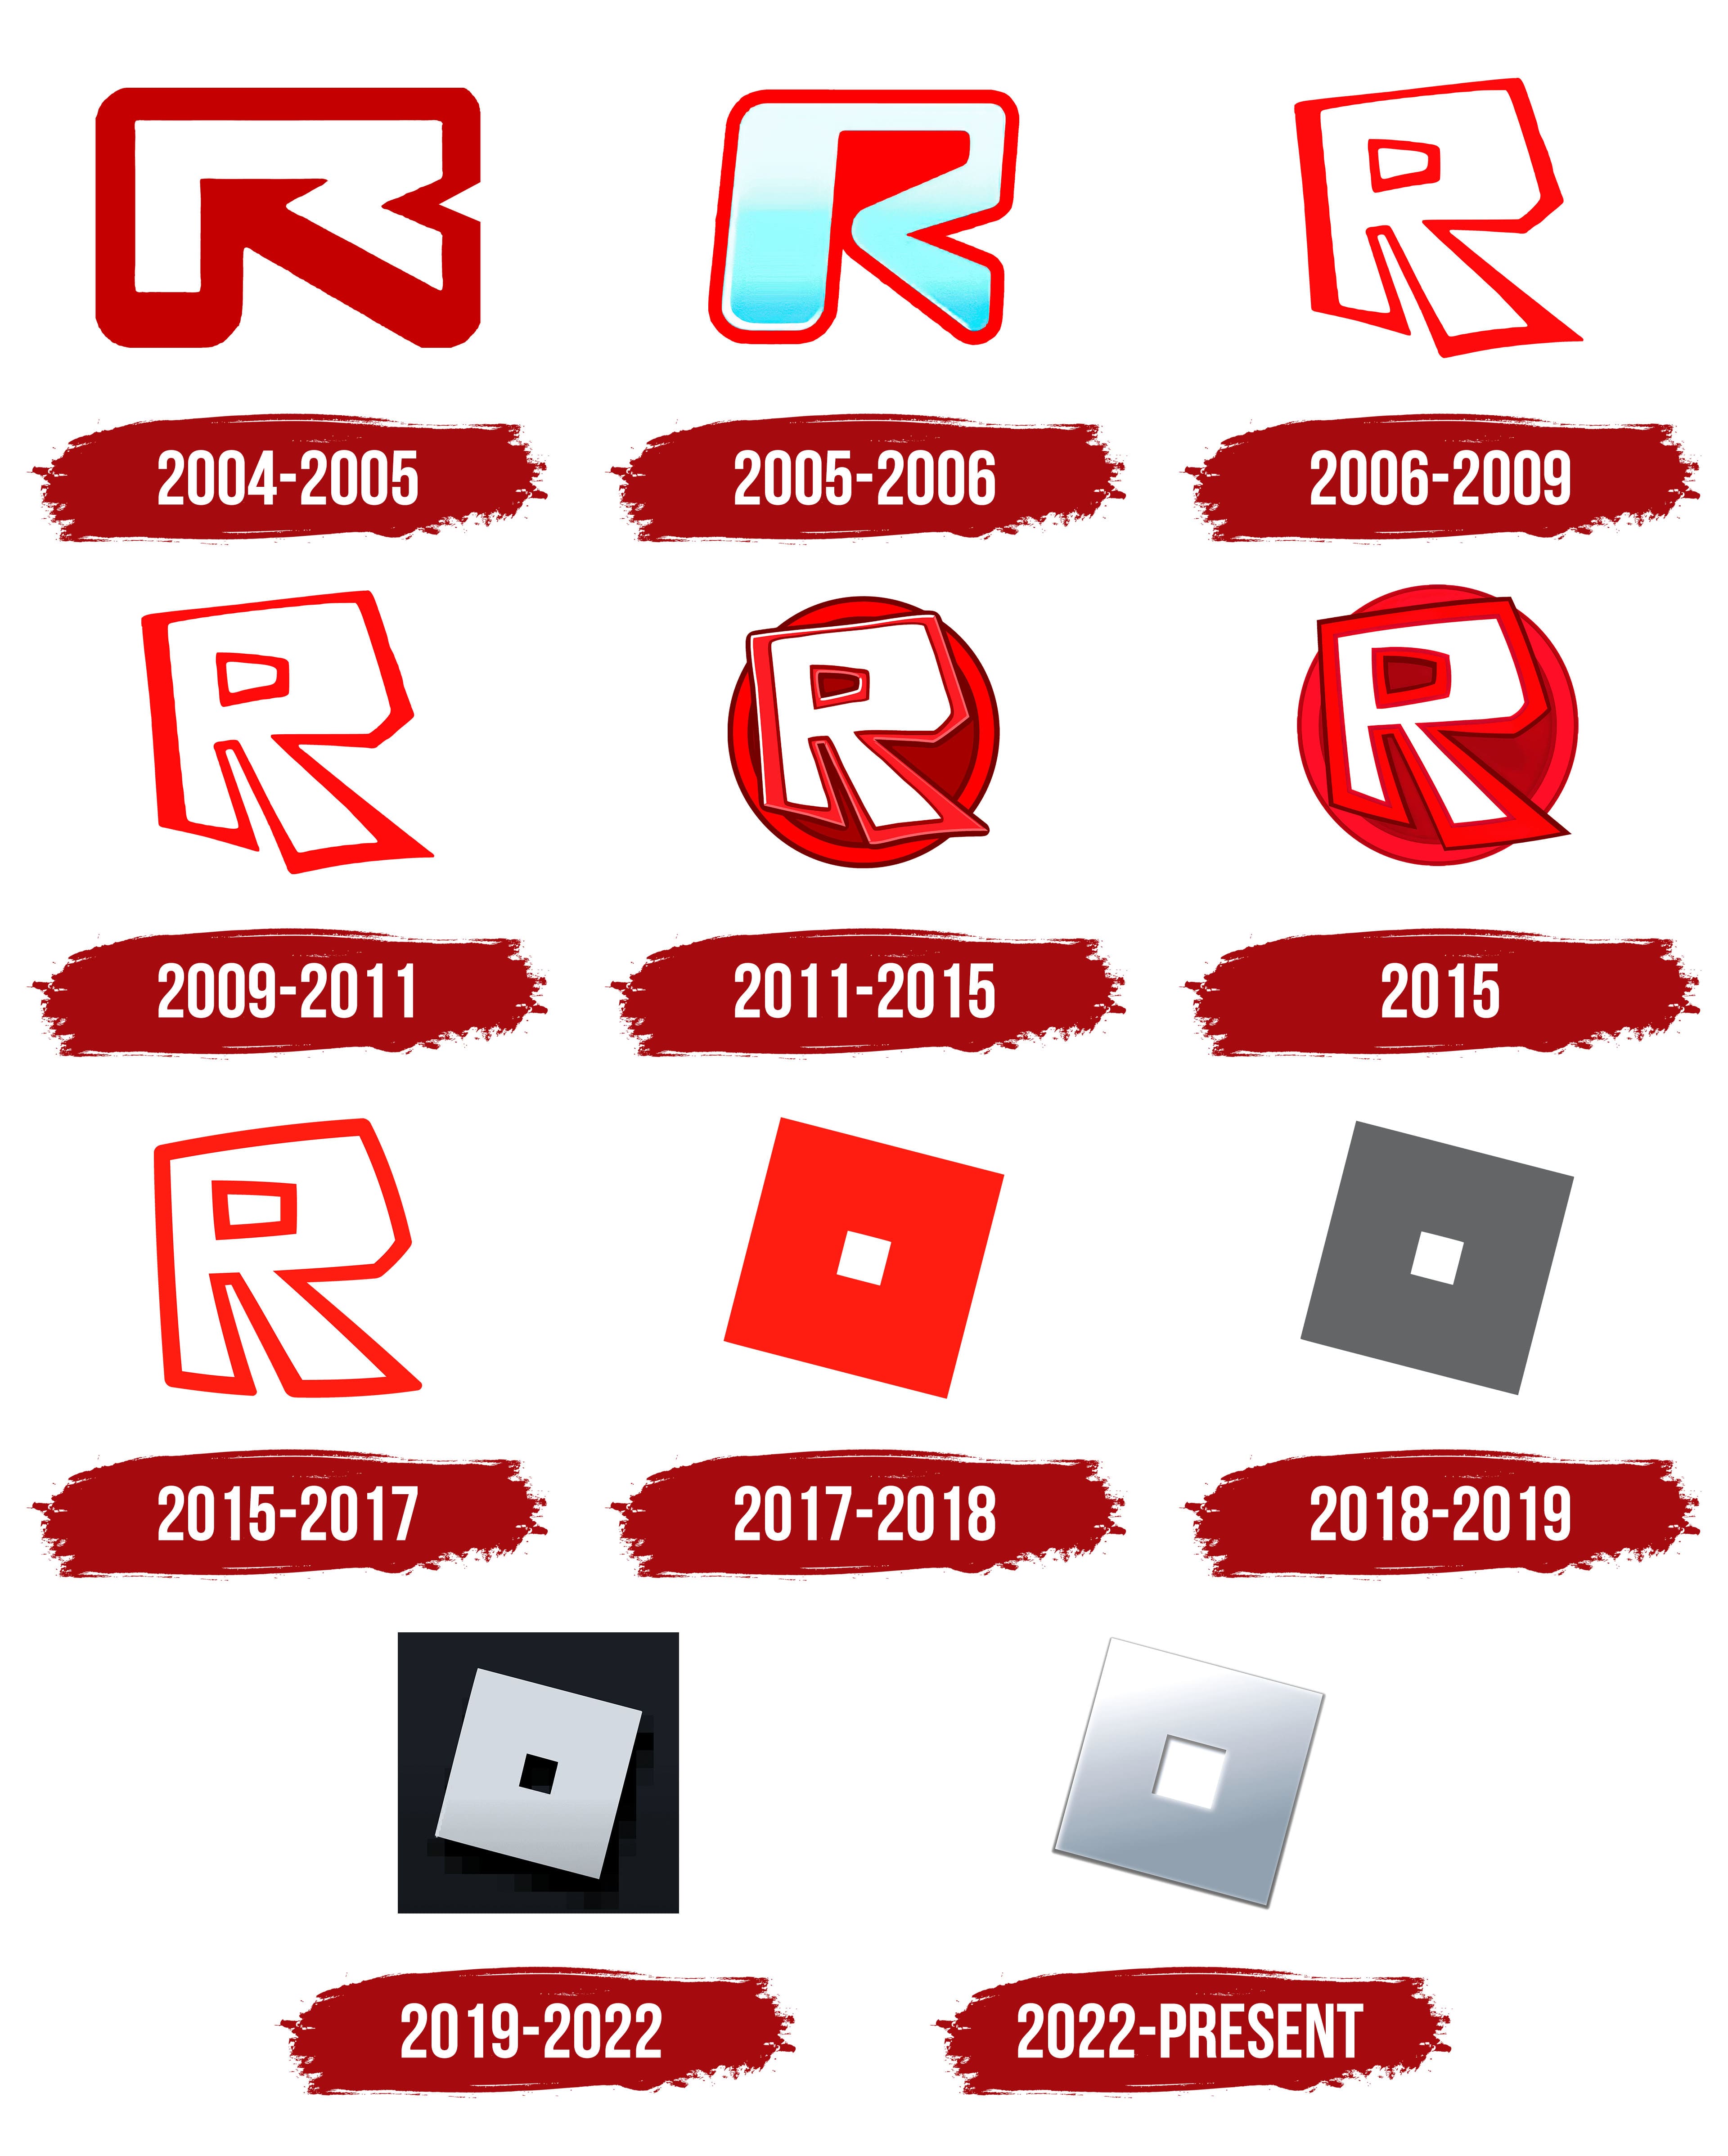 How to draw the Roblox logo from 2015 to 2017 using MS Paint